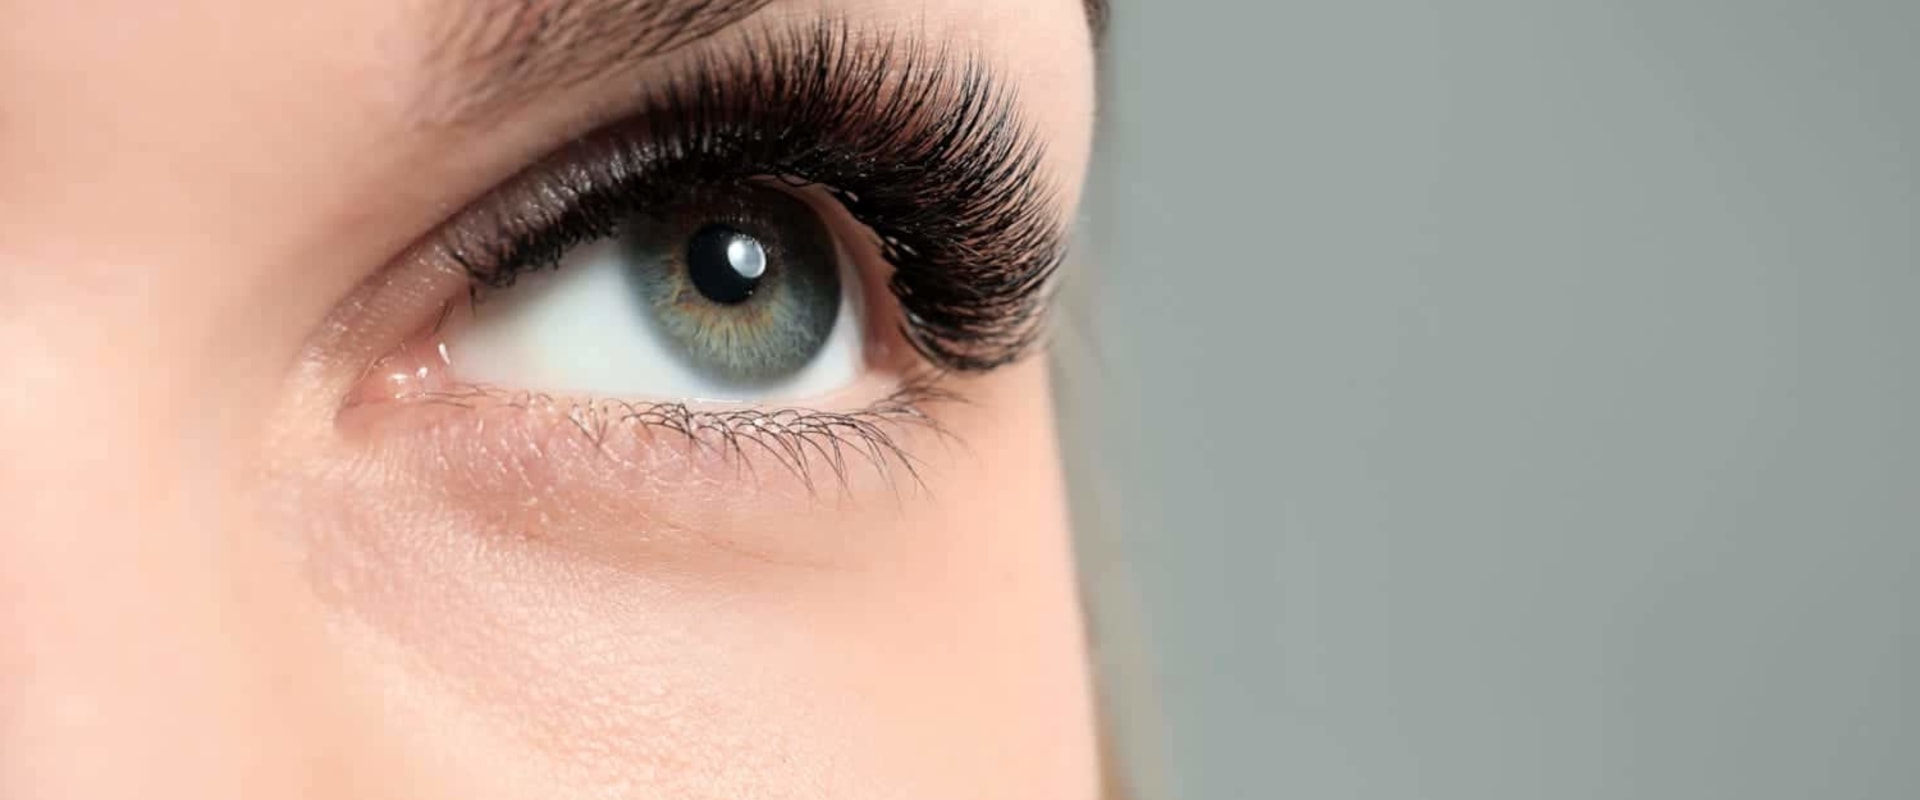 Are silk lashes better?